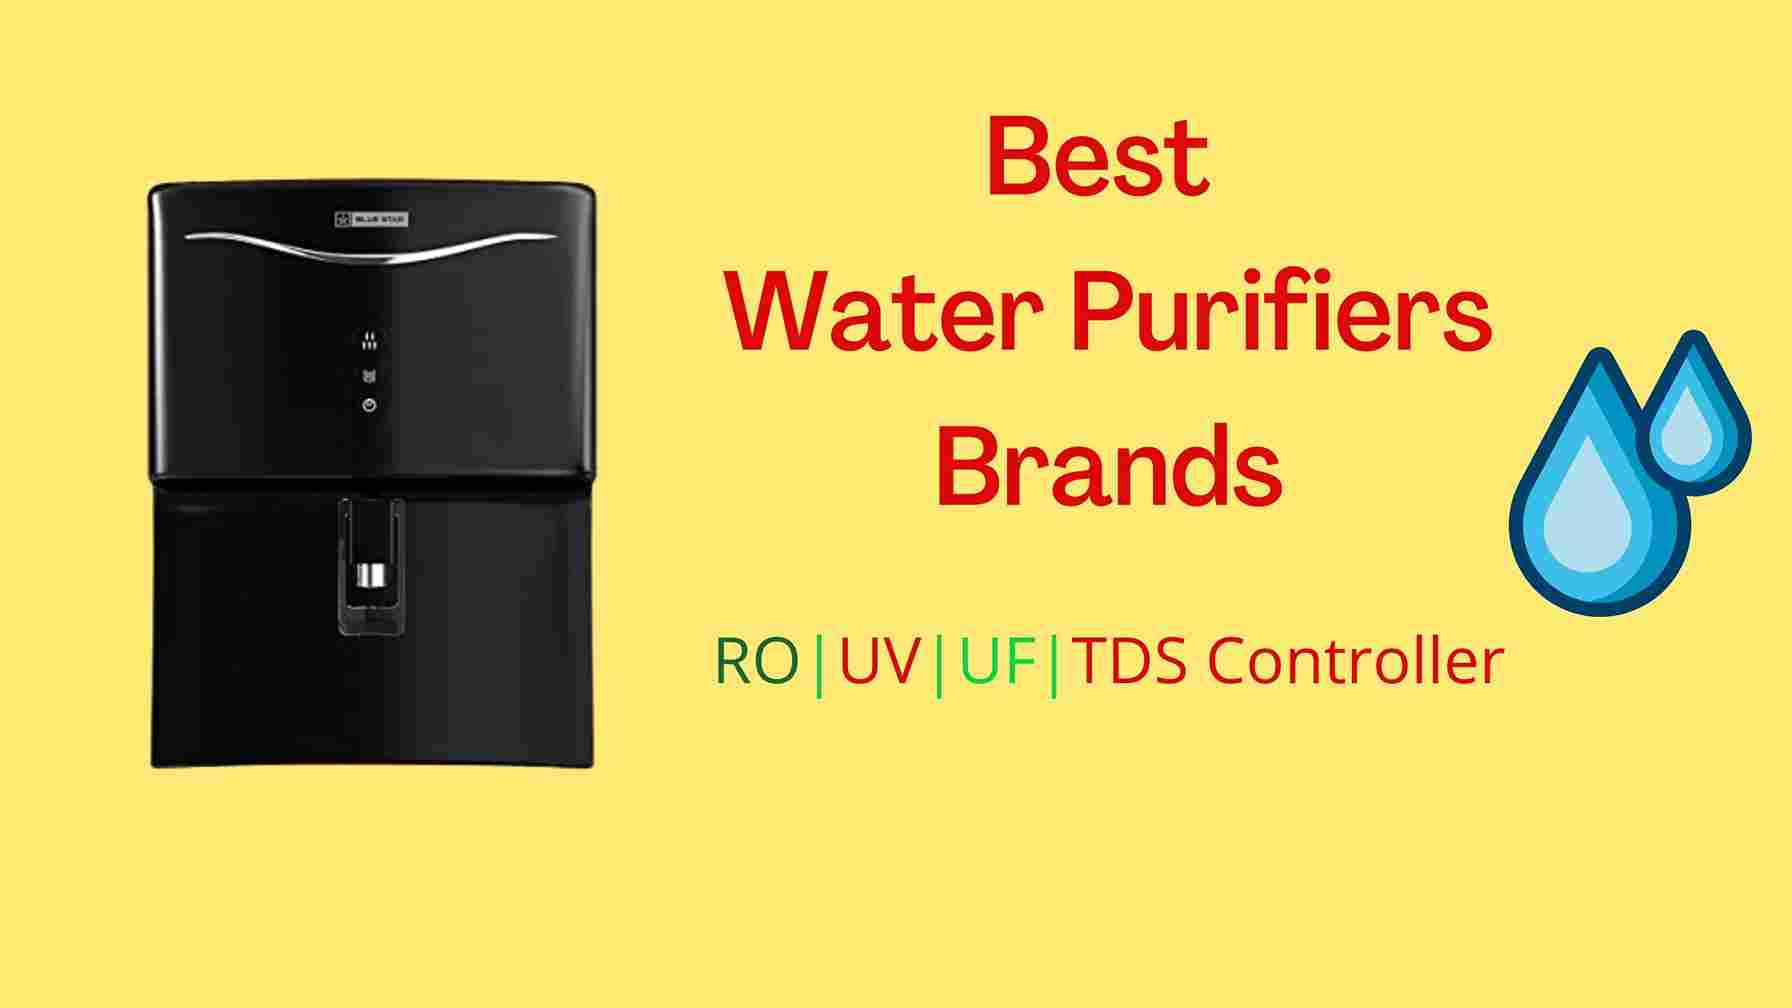 5 Best Water Purifier Brands in India | Best Water Purifier for Home under 10000Rs.